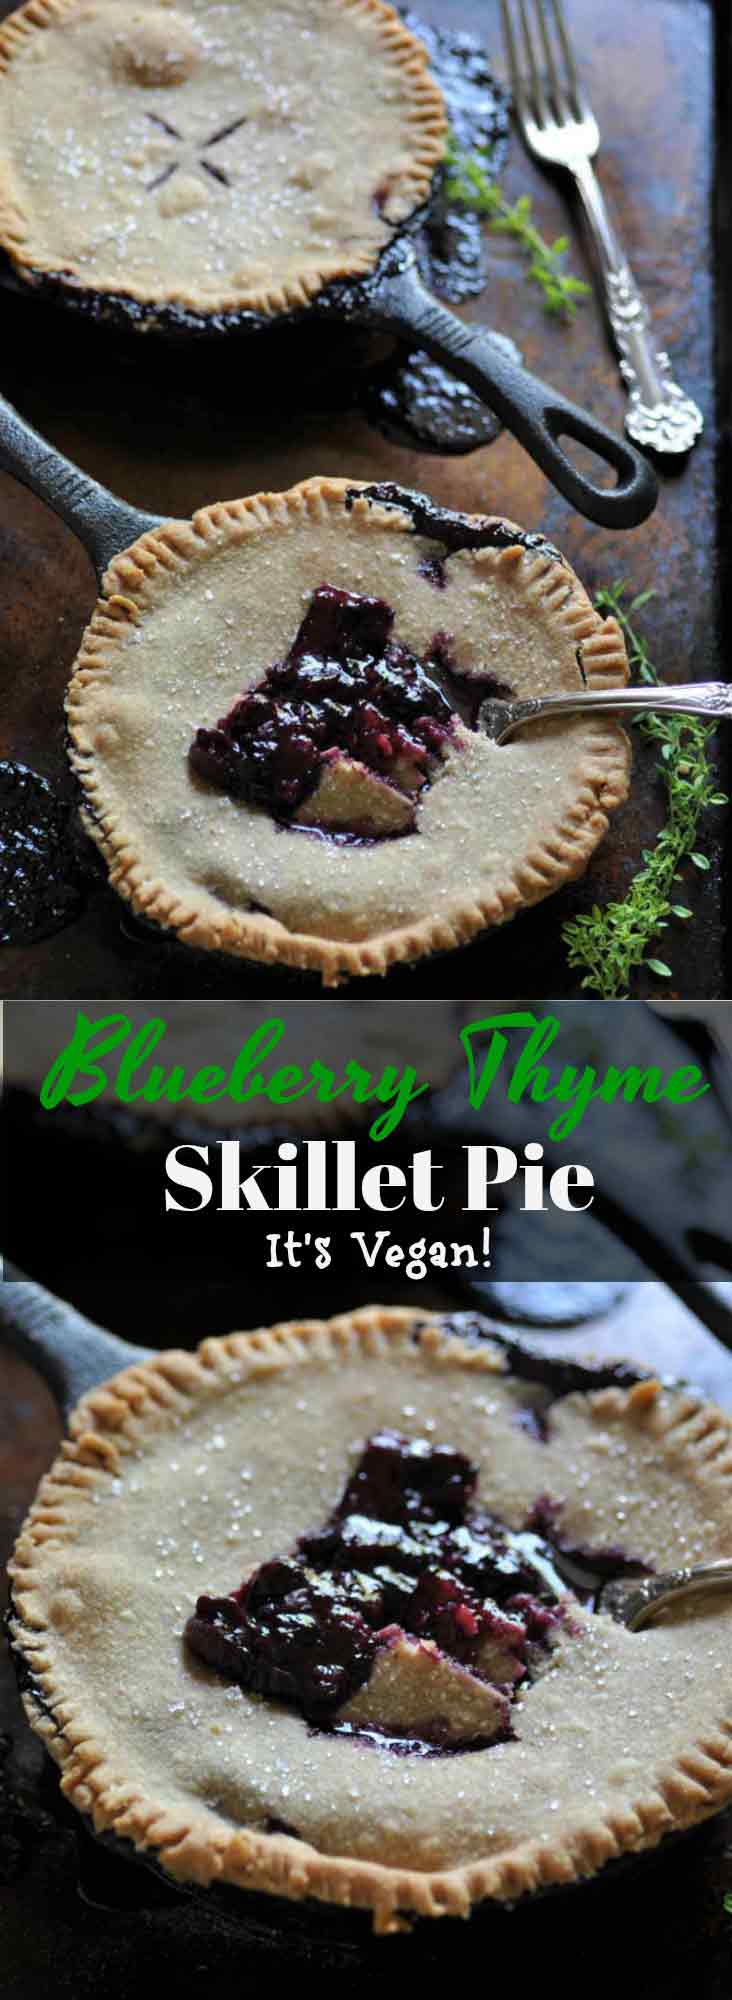 Blueberry Thyme Skillet Pie for two! This easy and delicious dessert is perfect for date night.